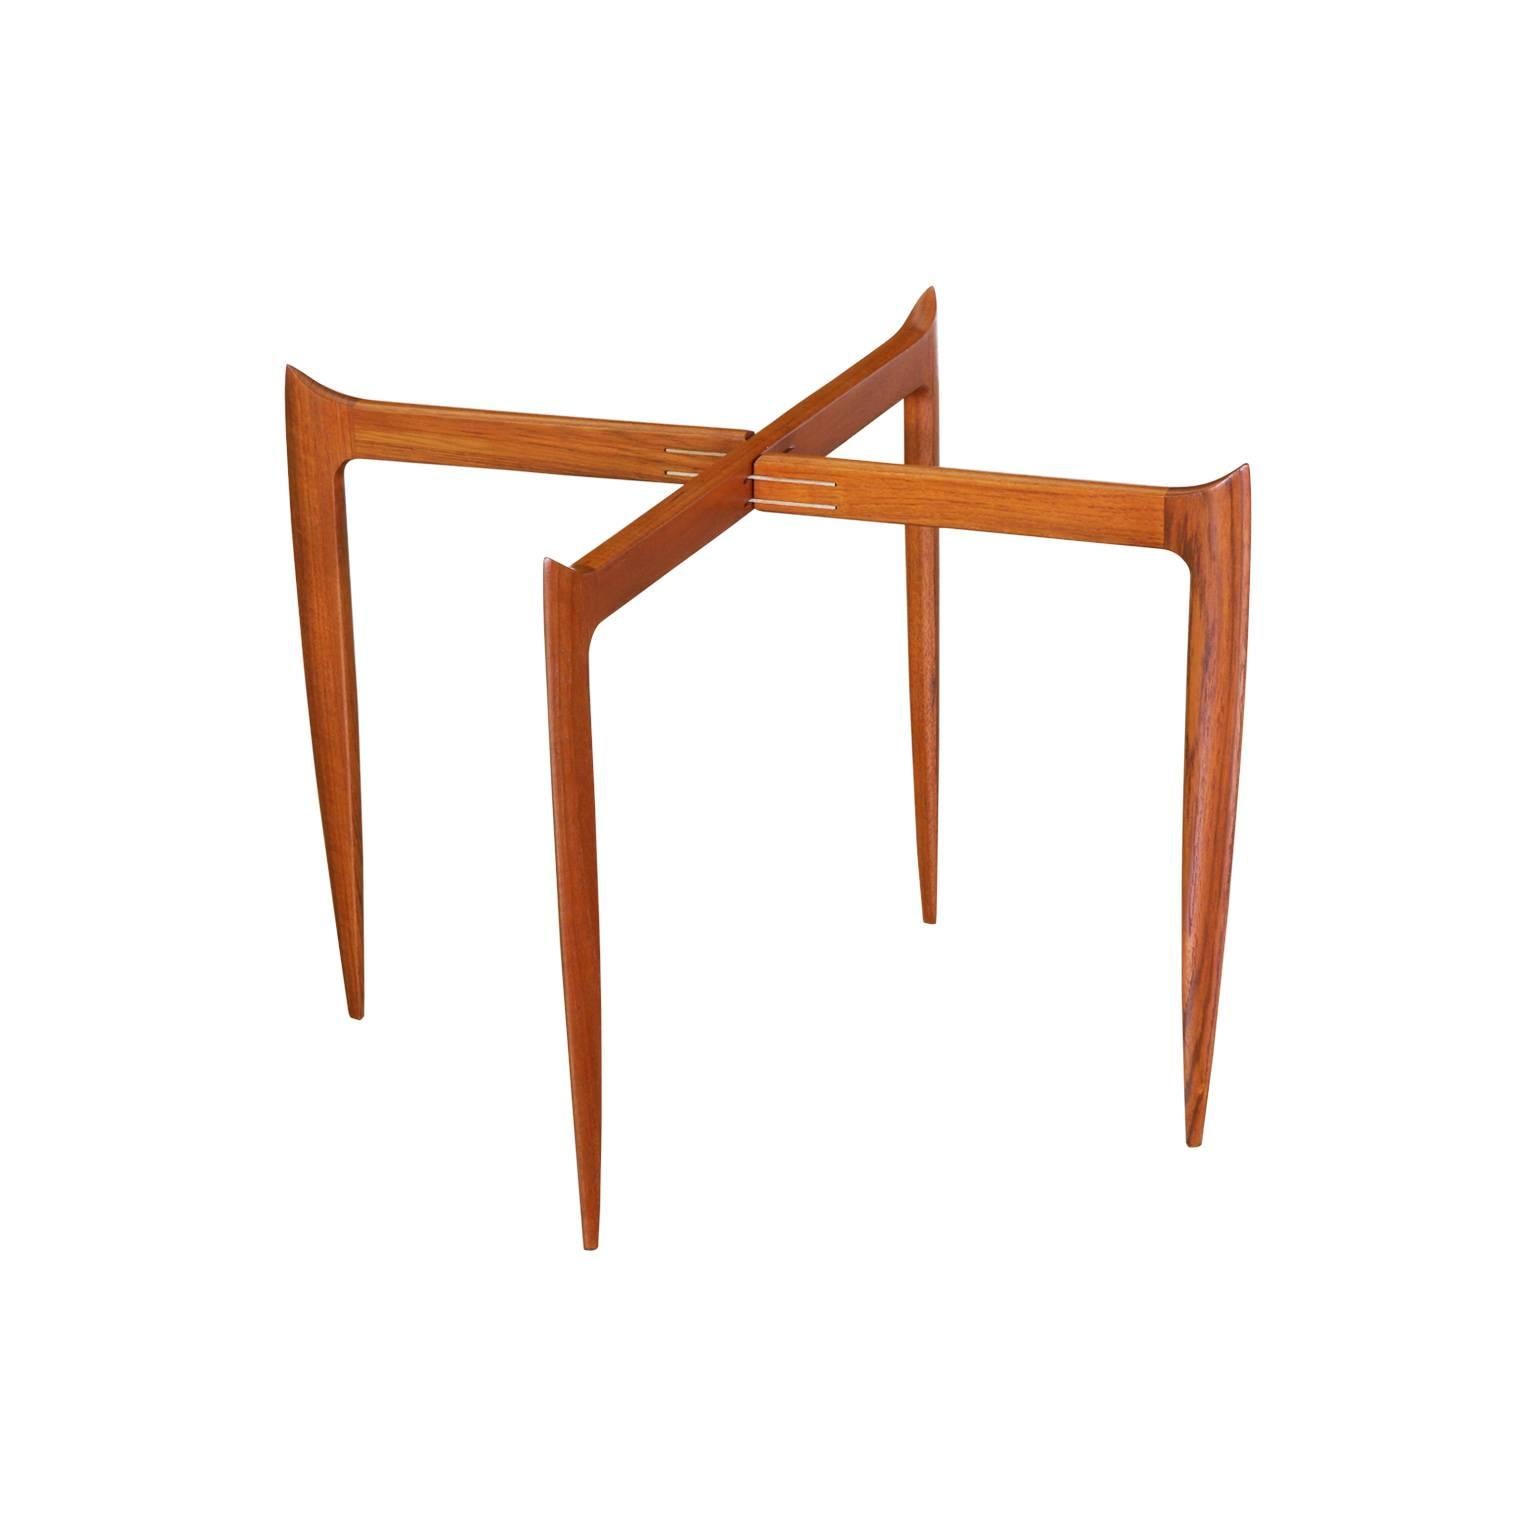 Designer: H. Engholm & Svend Åge Willumsen
Manufacturer: Fritz Hansen
Period/Style: Danish Modern
Country: Denmark
Date: 1958

Dimensions: 16.75″H x 23.5″W
Materials: Teak
Condition: Excellent – Newly Refinished
Number of Items: 1
ID